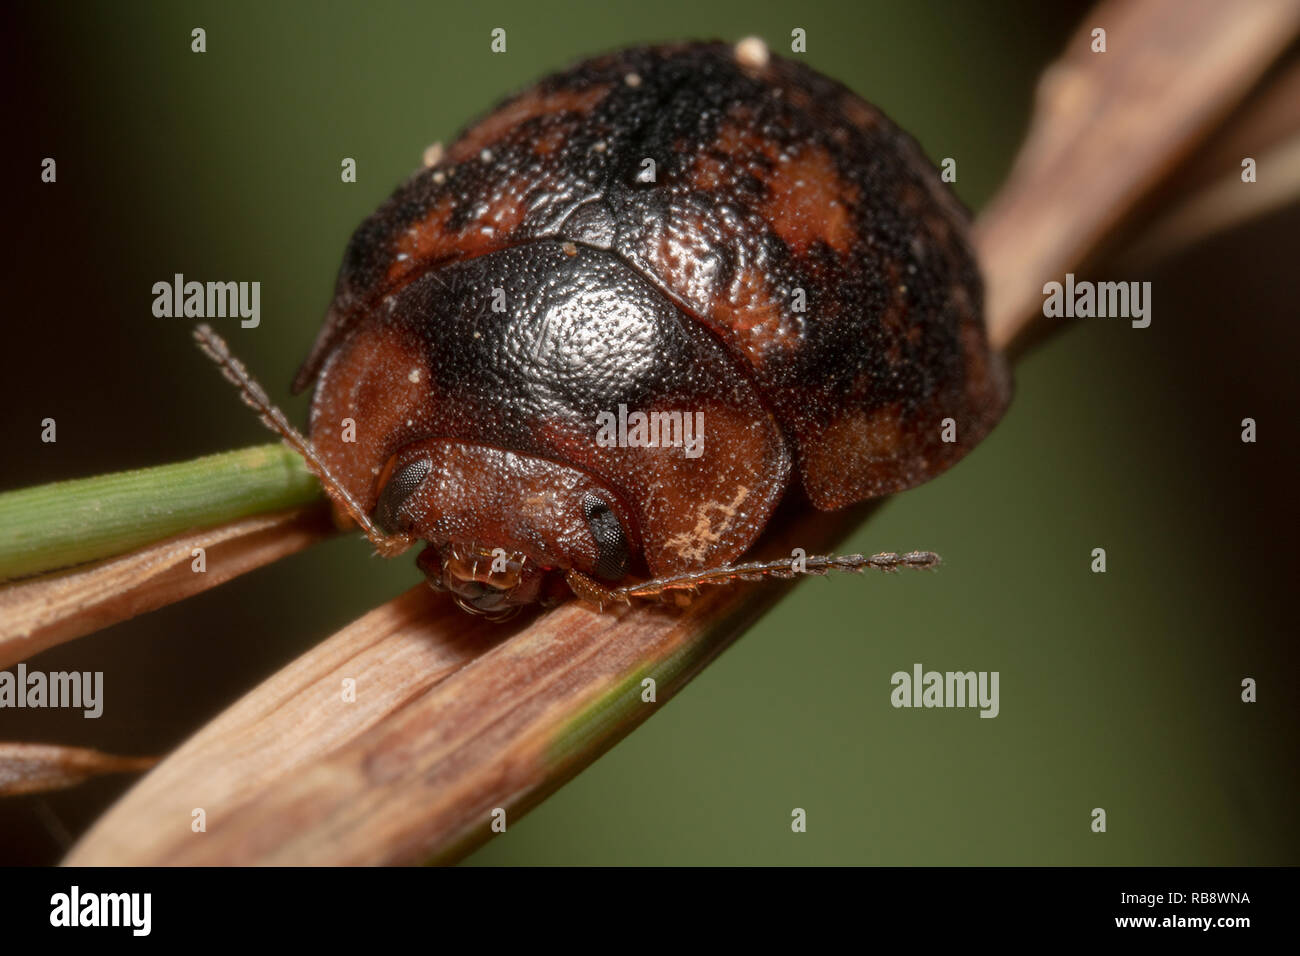 Gum Nut Leaf Beetle sitting on a branch, side view with green and black background Stock Photo